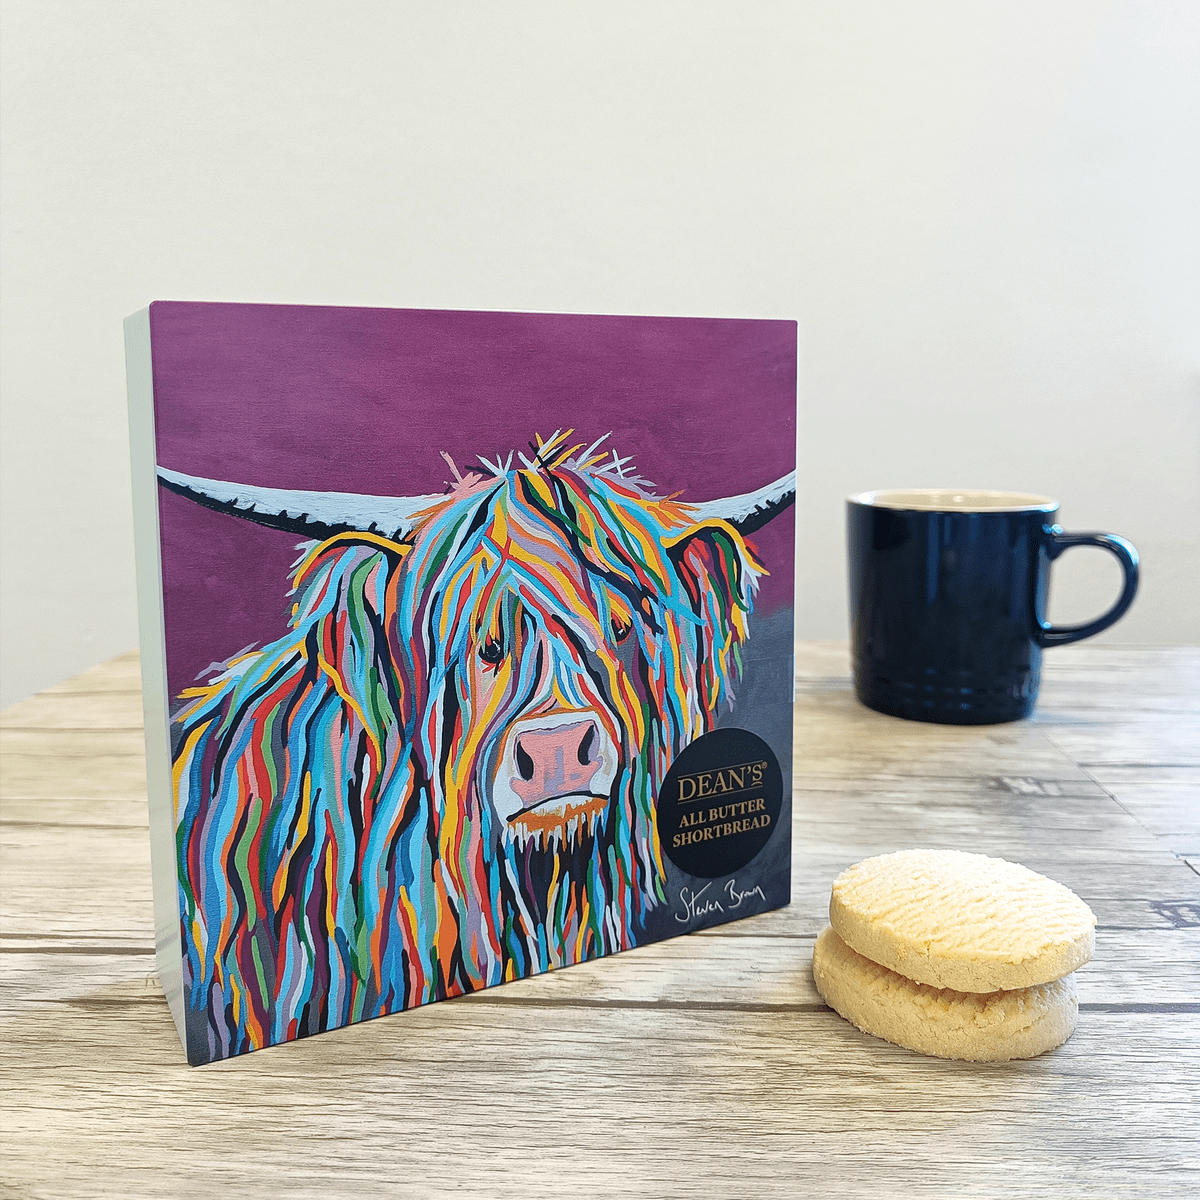 Buy the Angus McCoo All Butter Shortbread Rounds 150g online at Dean's